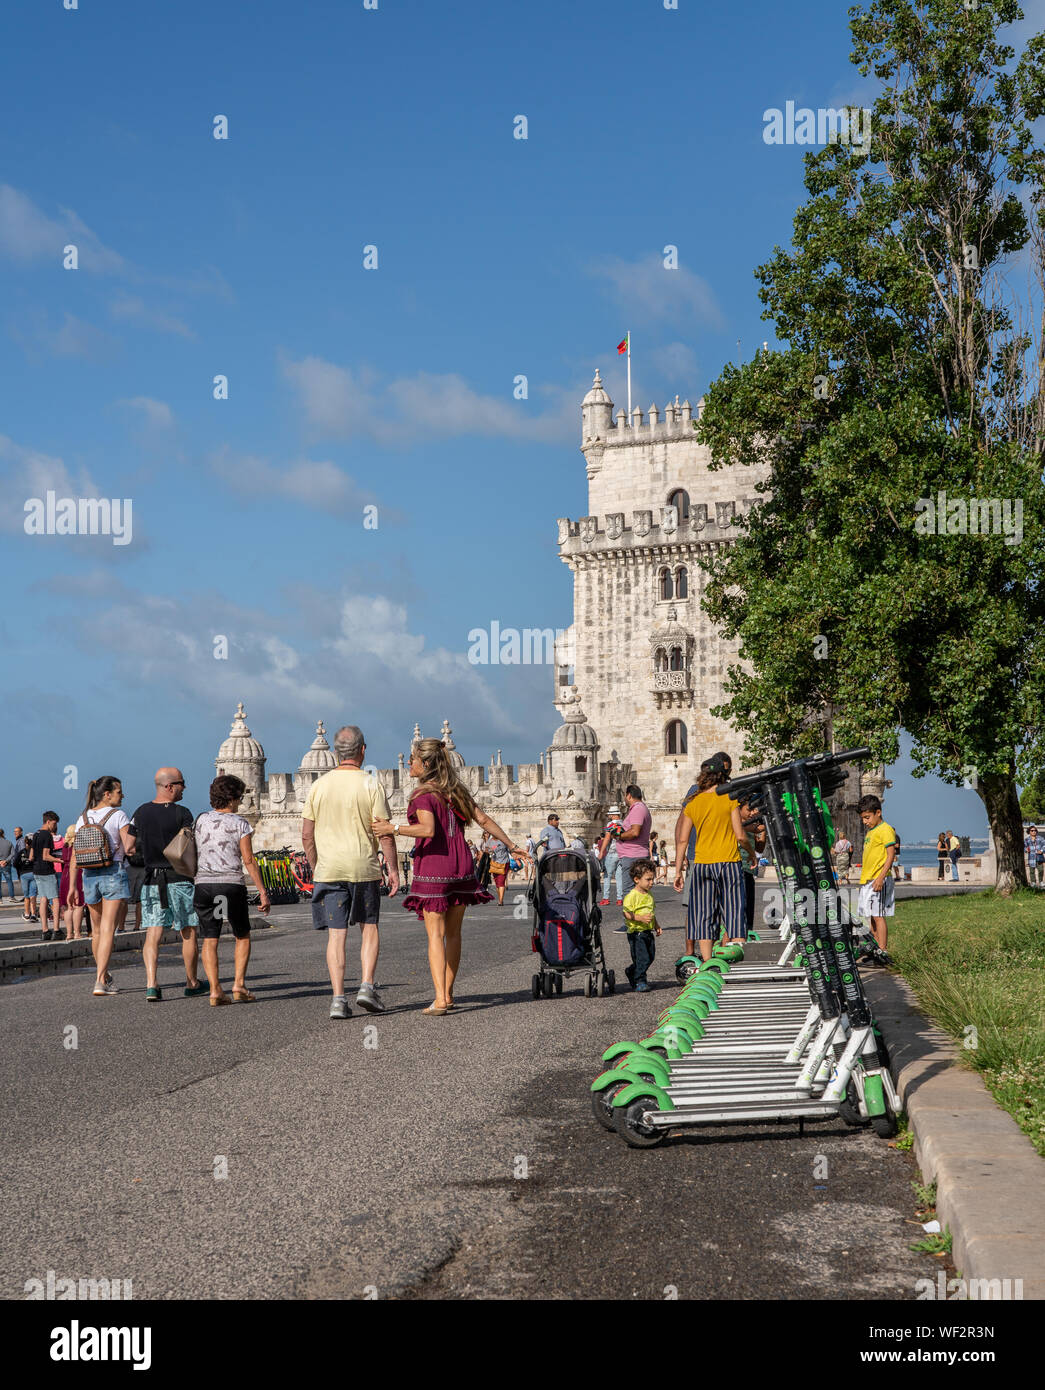 Lime S electric scooters in Lisbon by the Belem Tower Stock Photo